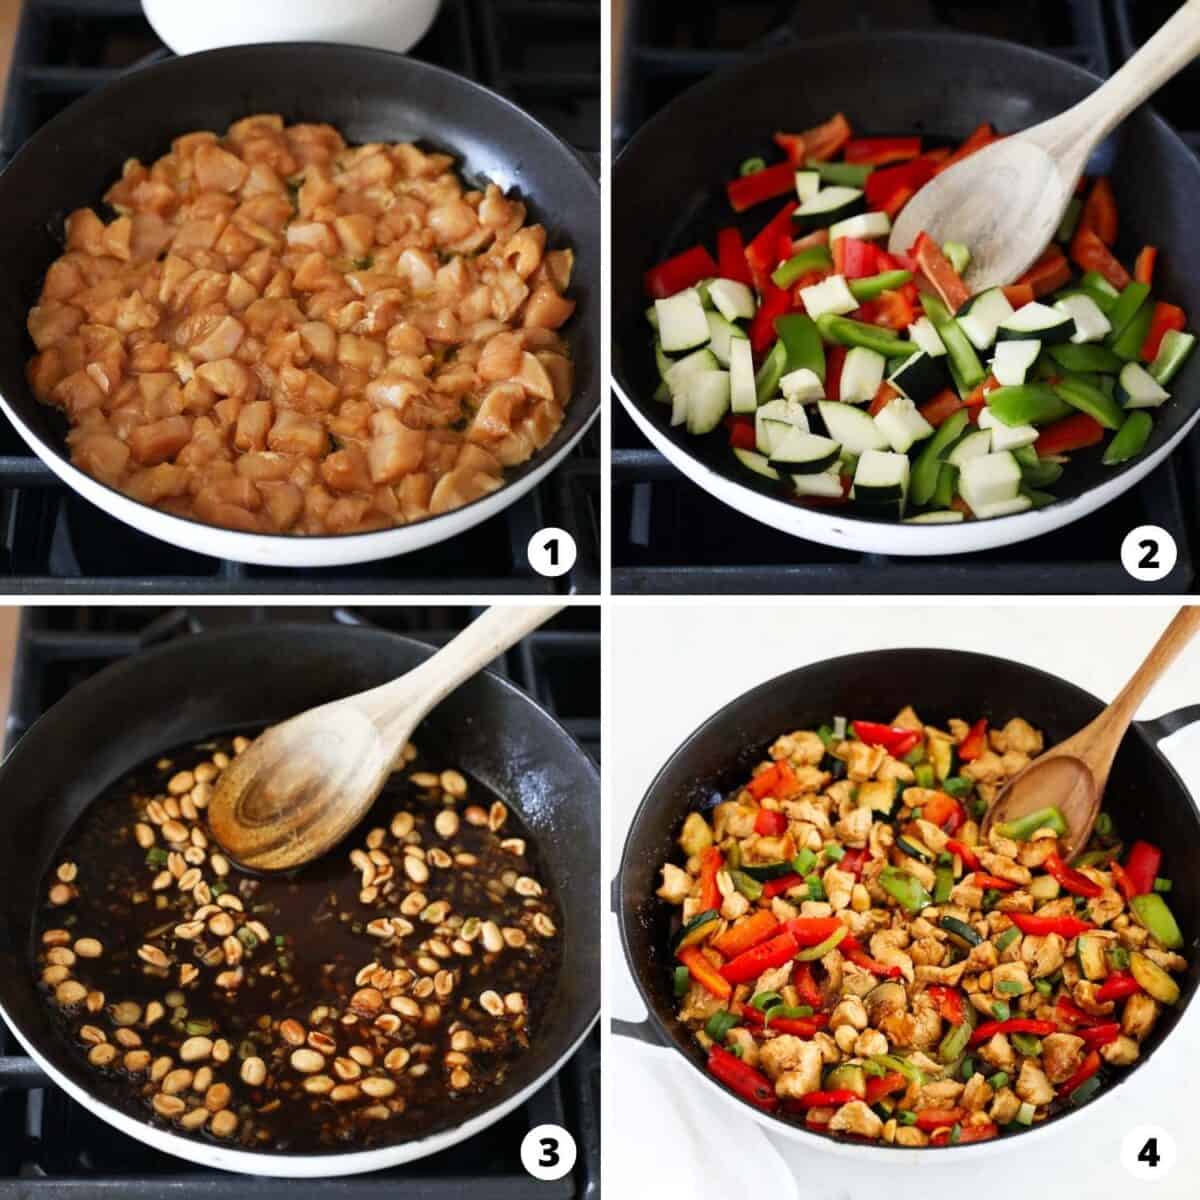 Step by step collage making kung pao chicken.